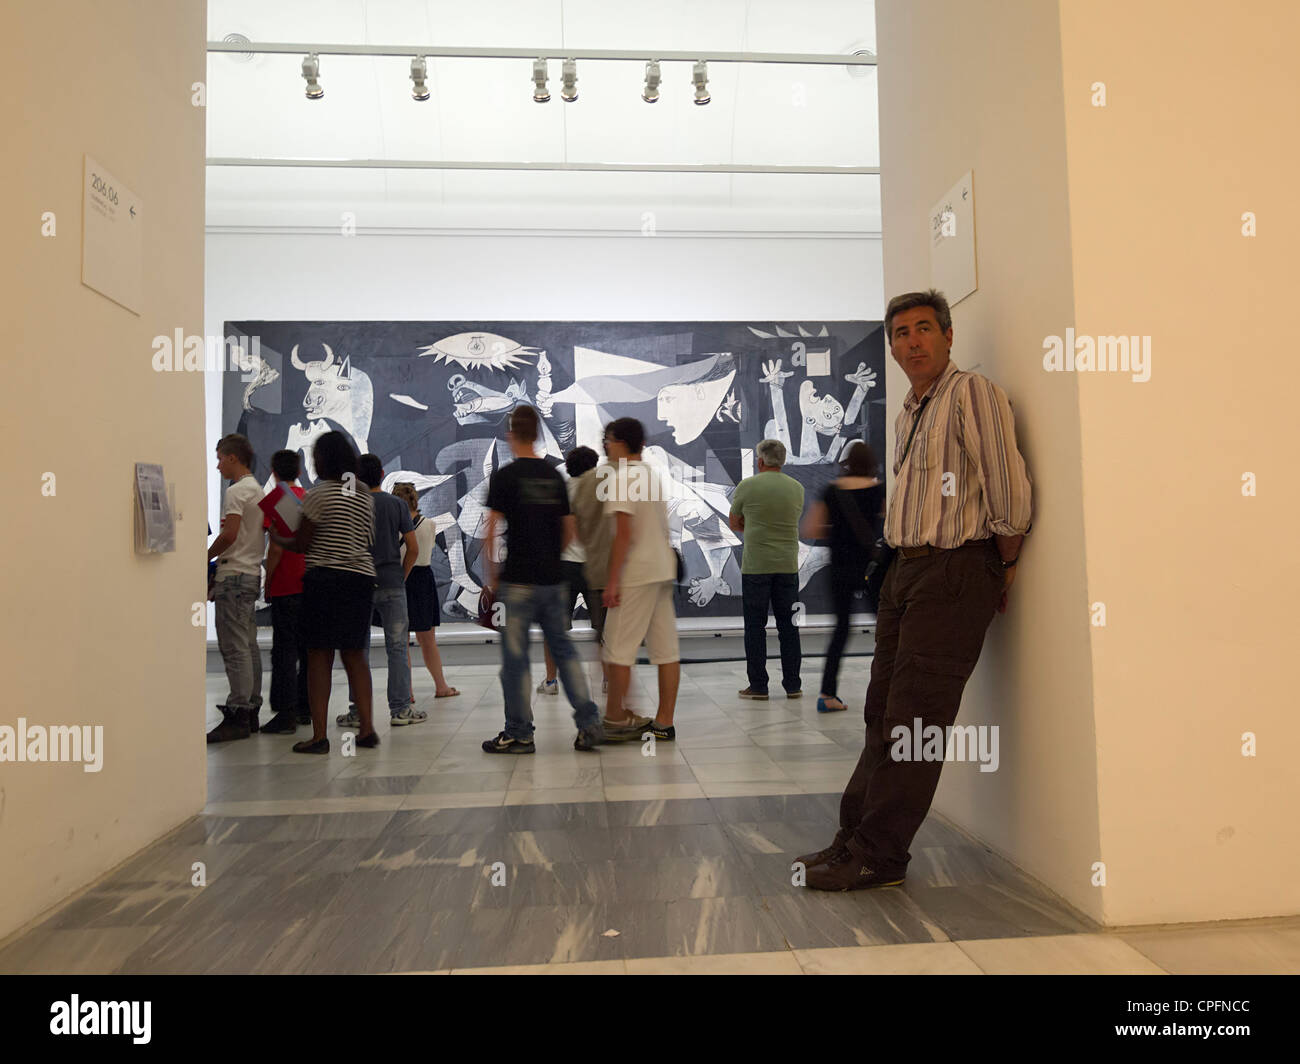 Visitors looking at 'Guernica' painting by Pablo Picasso at the Reina Sofia modern art museum in Madrid, Spain Stock Photo